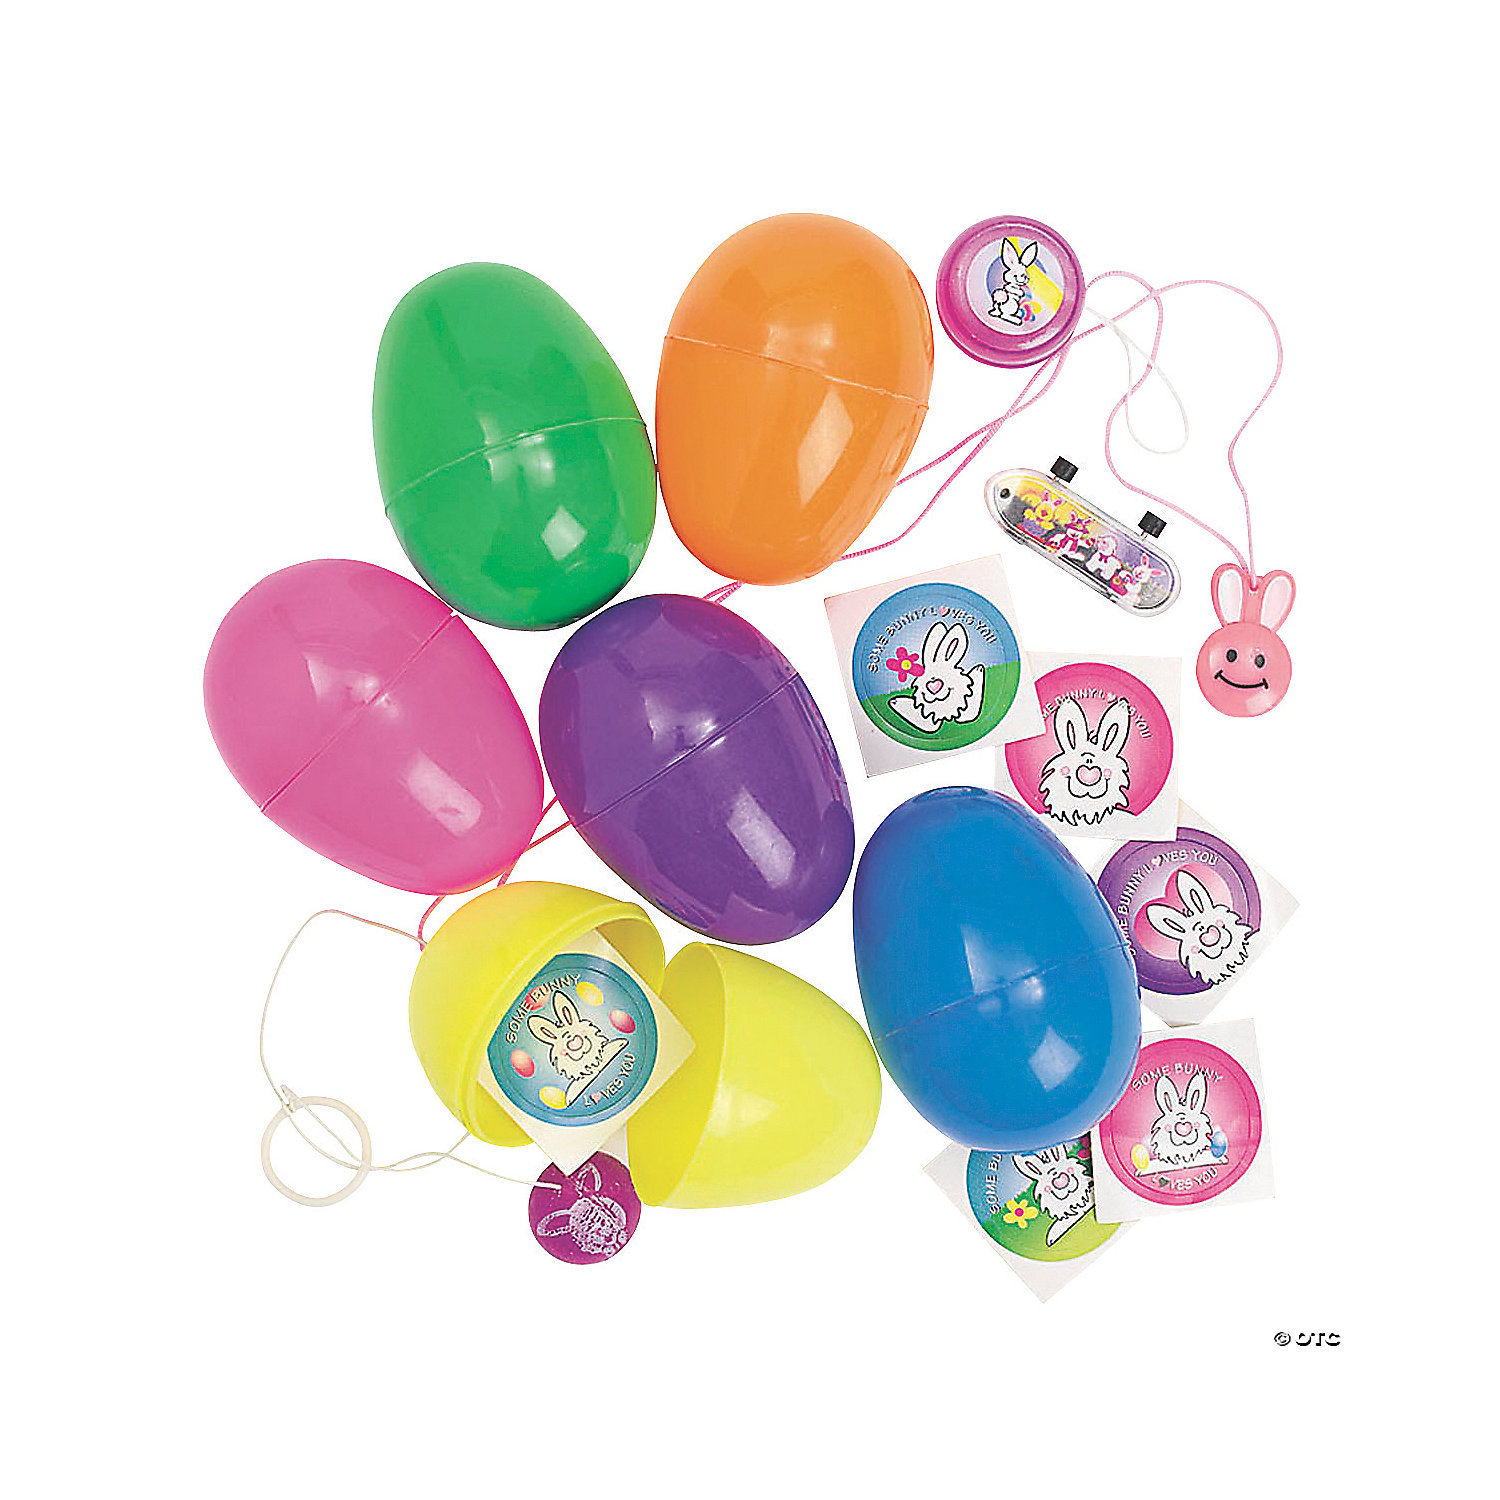 Bracelet 3.25 Jumbo Colorful Prefilled Plastic Eggs with Wind-up Bunny Rabbit Toys Include LED Necklace Ring 12 PCs Toys Filled Easter Eggs 